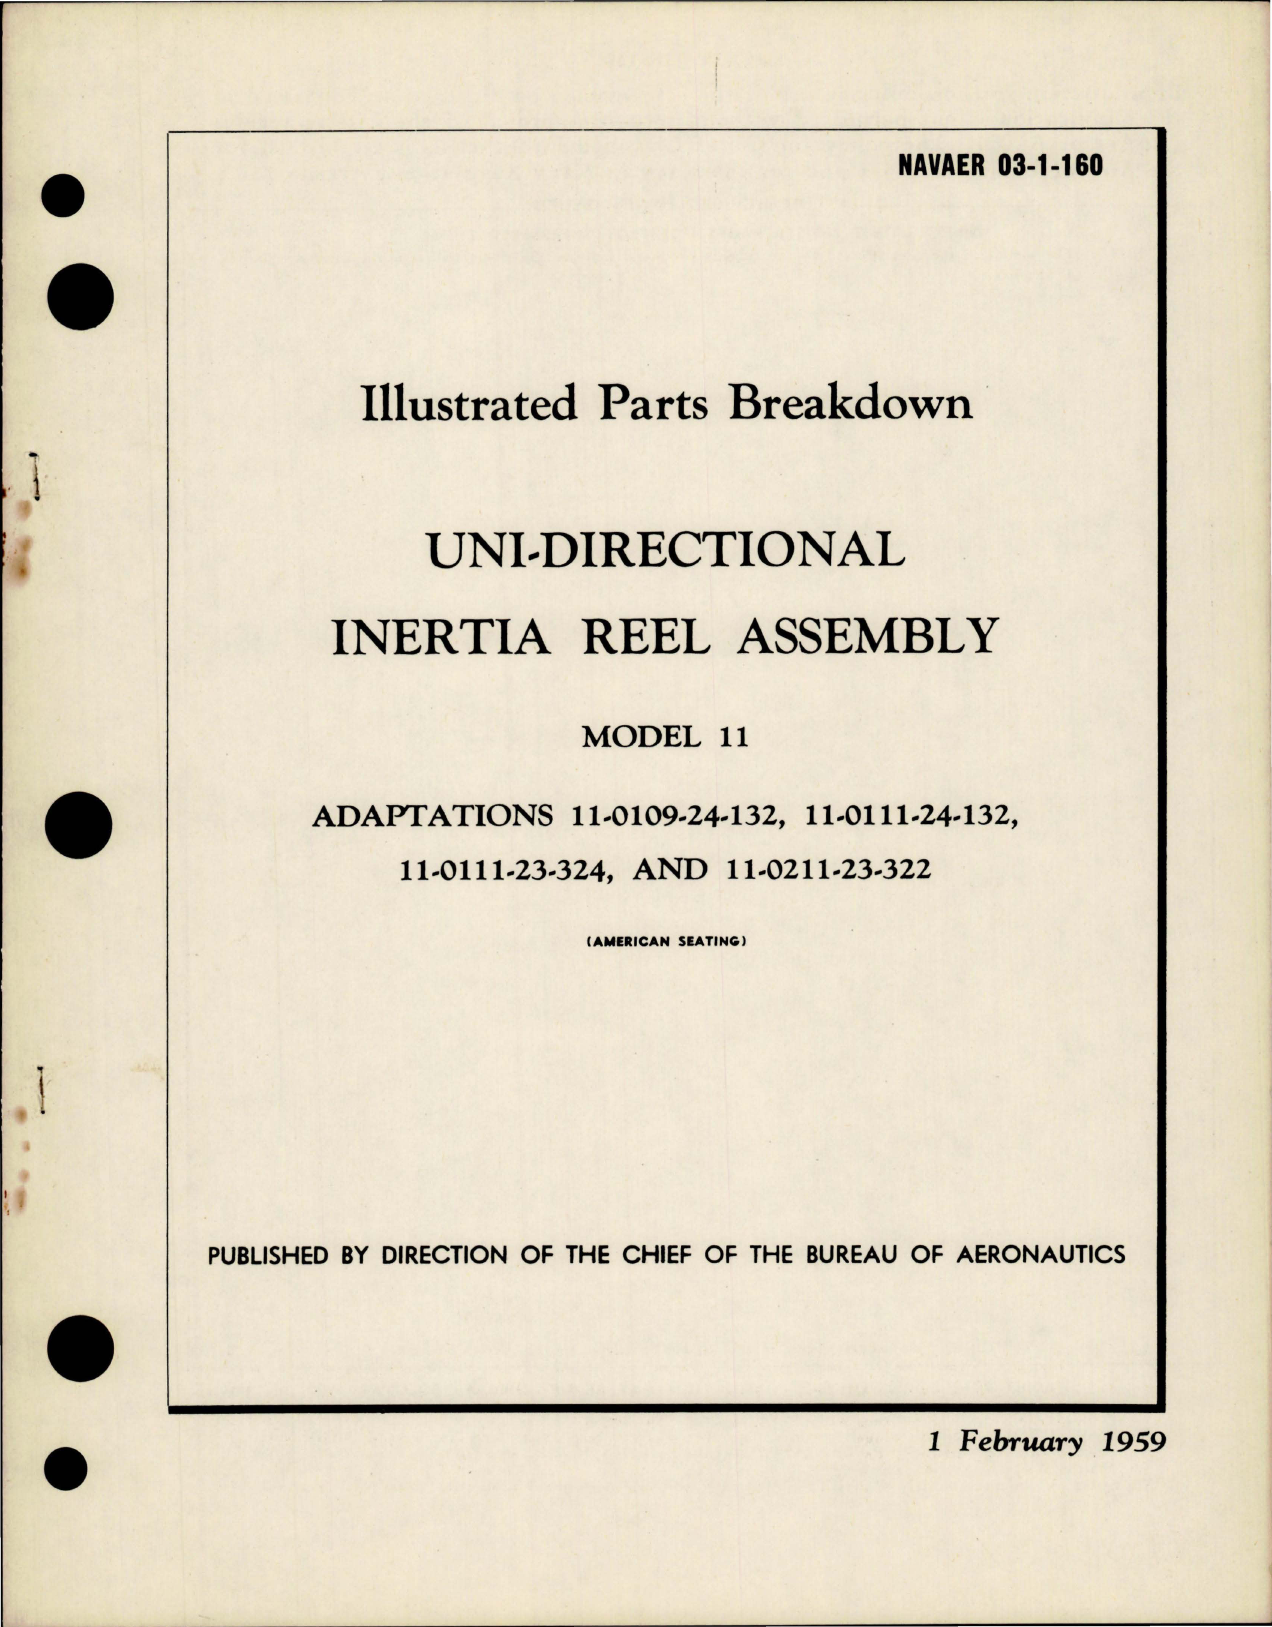 Sample page 1 from AirCorps Library document: Illustrated Parts Breakdown for Uni-Directional Inertia Reed Assy - Model 11 